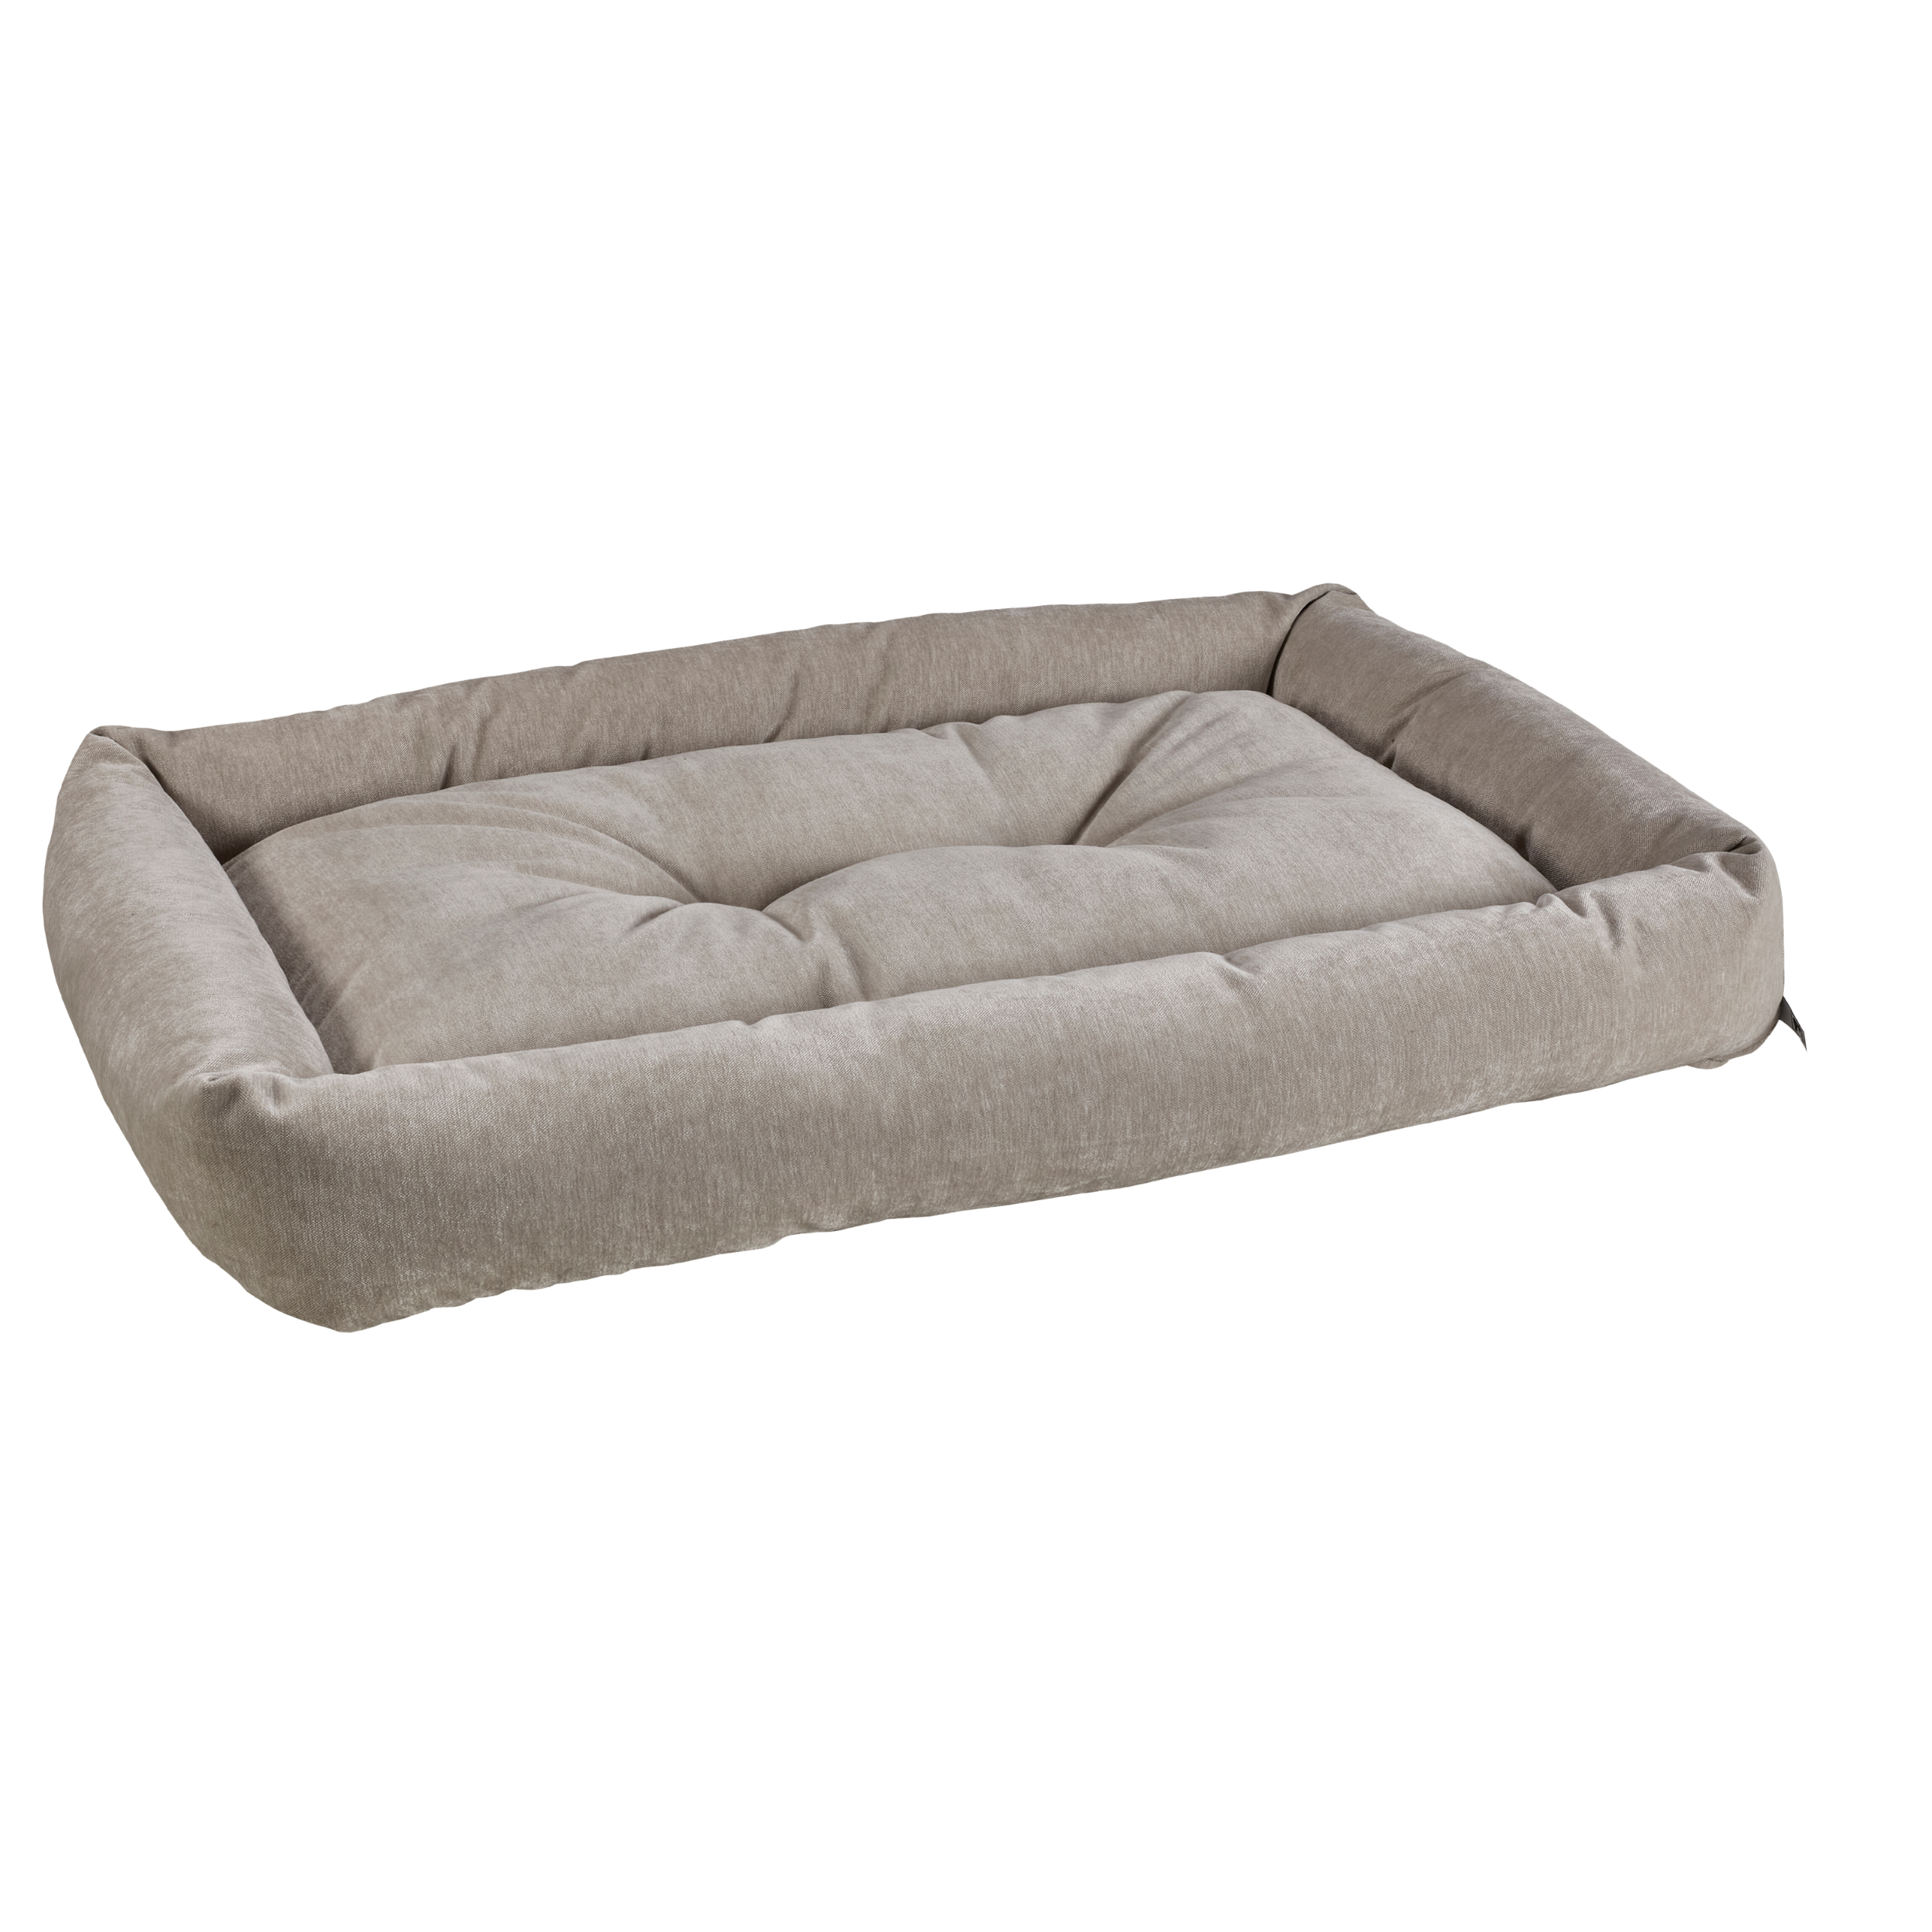 OYSTER-TANGO-DOG-BED-KENNEL-CRATE-MAT